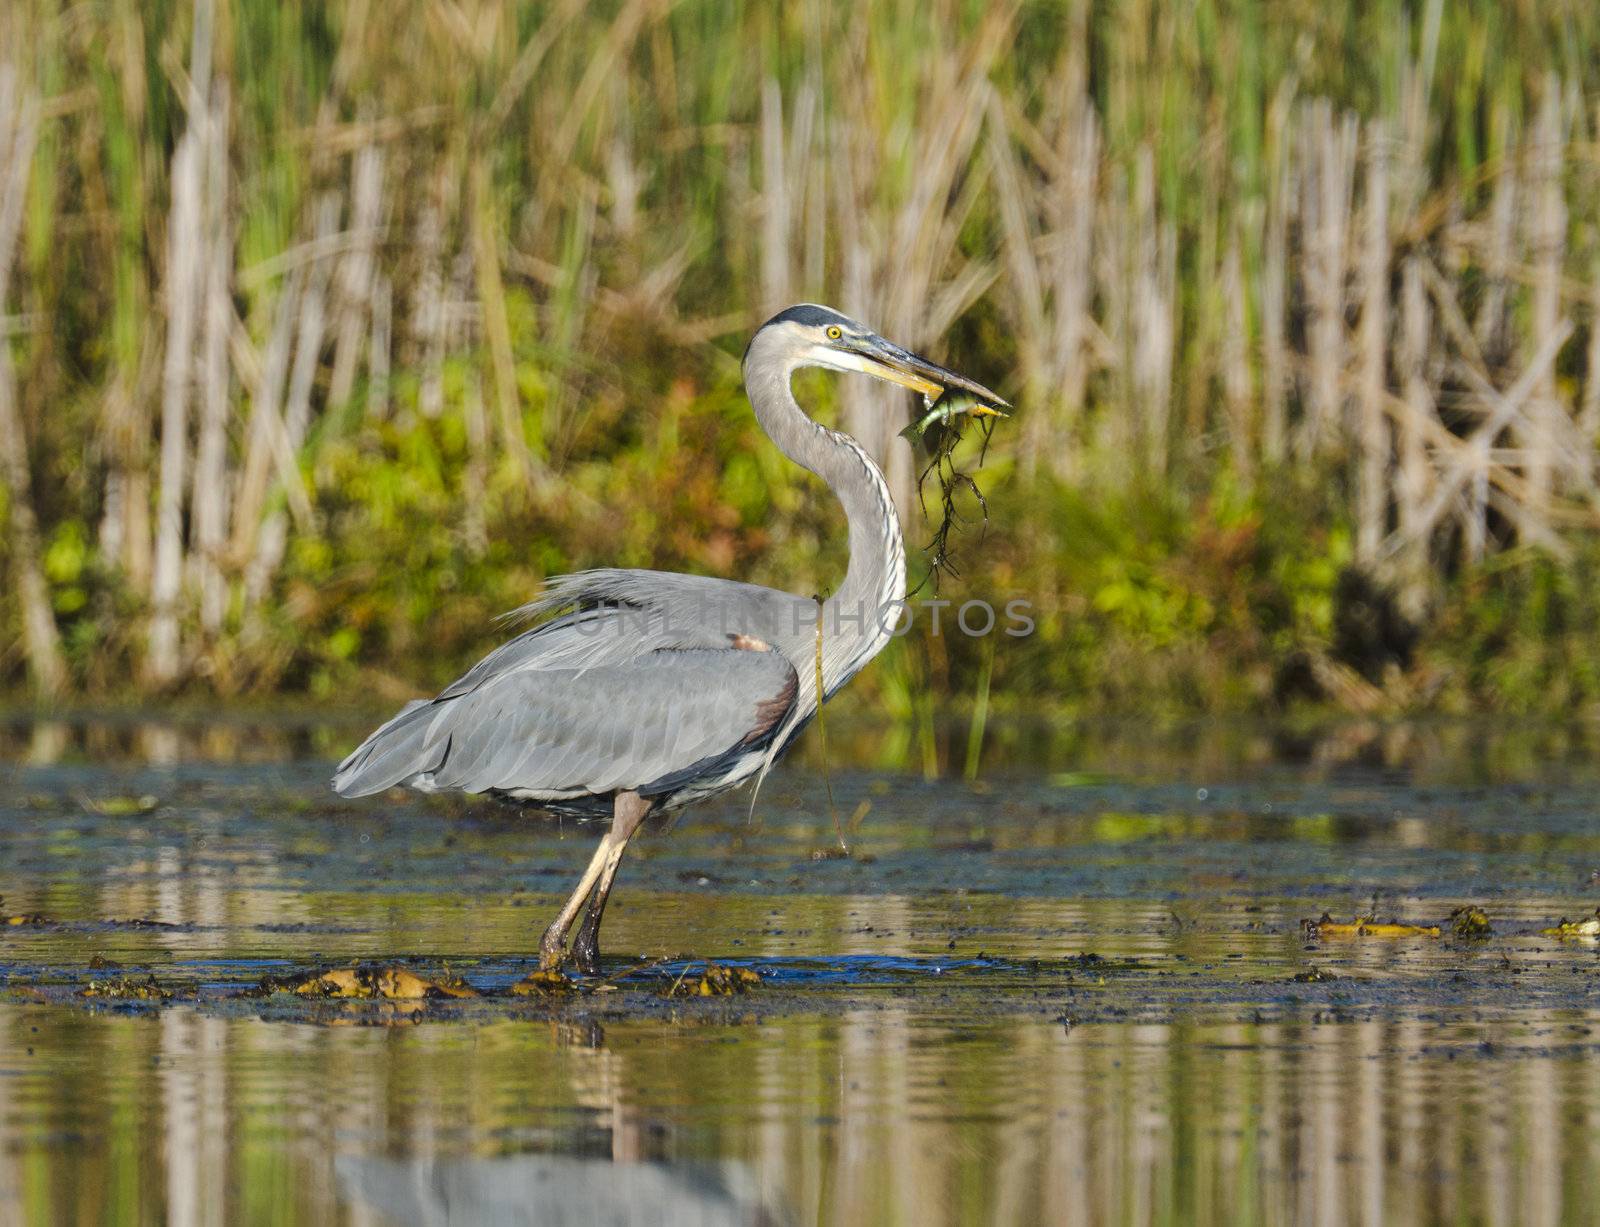 Heron Catches a Fish by Gordo25